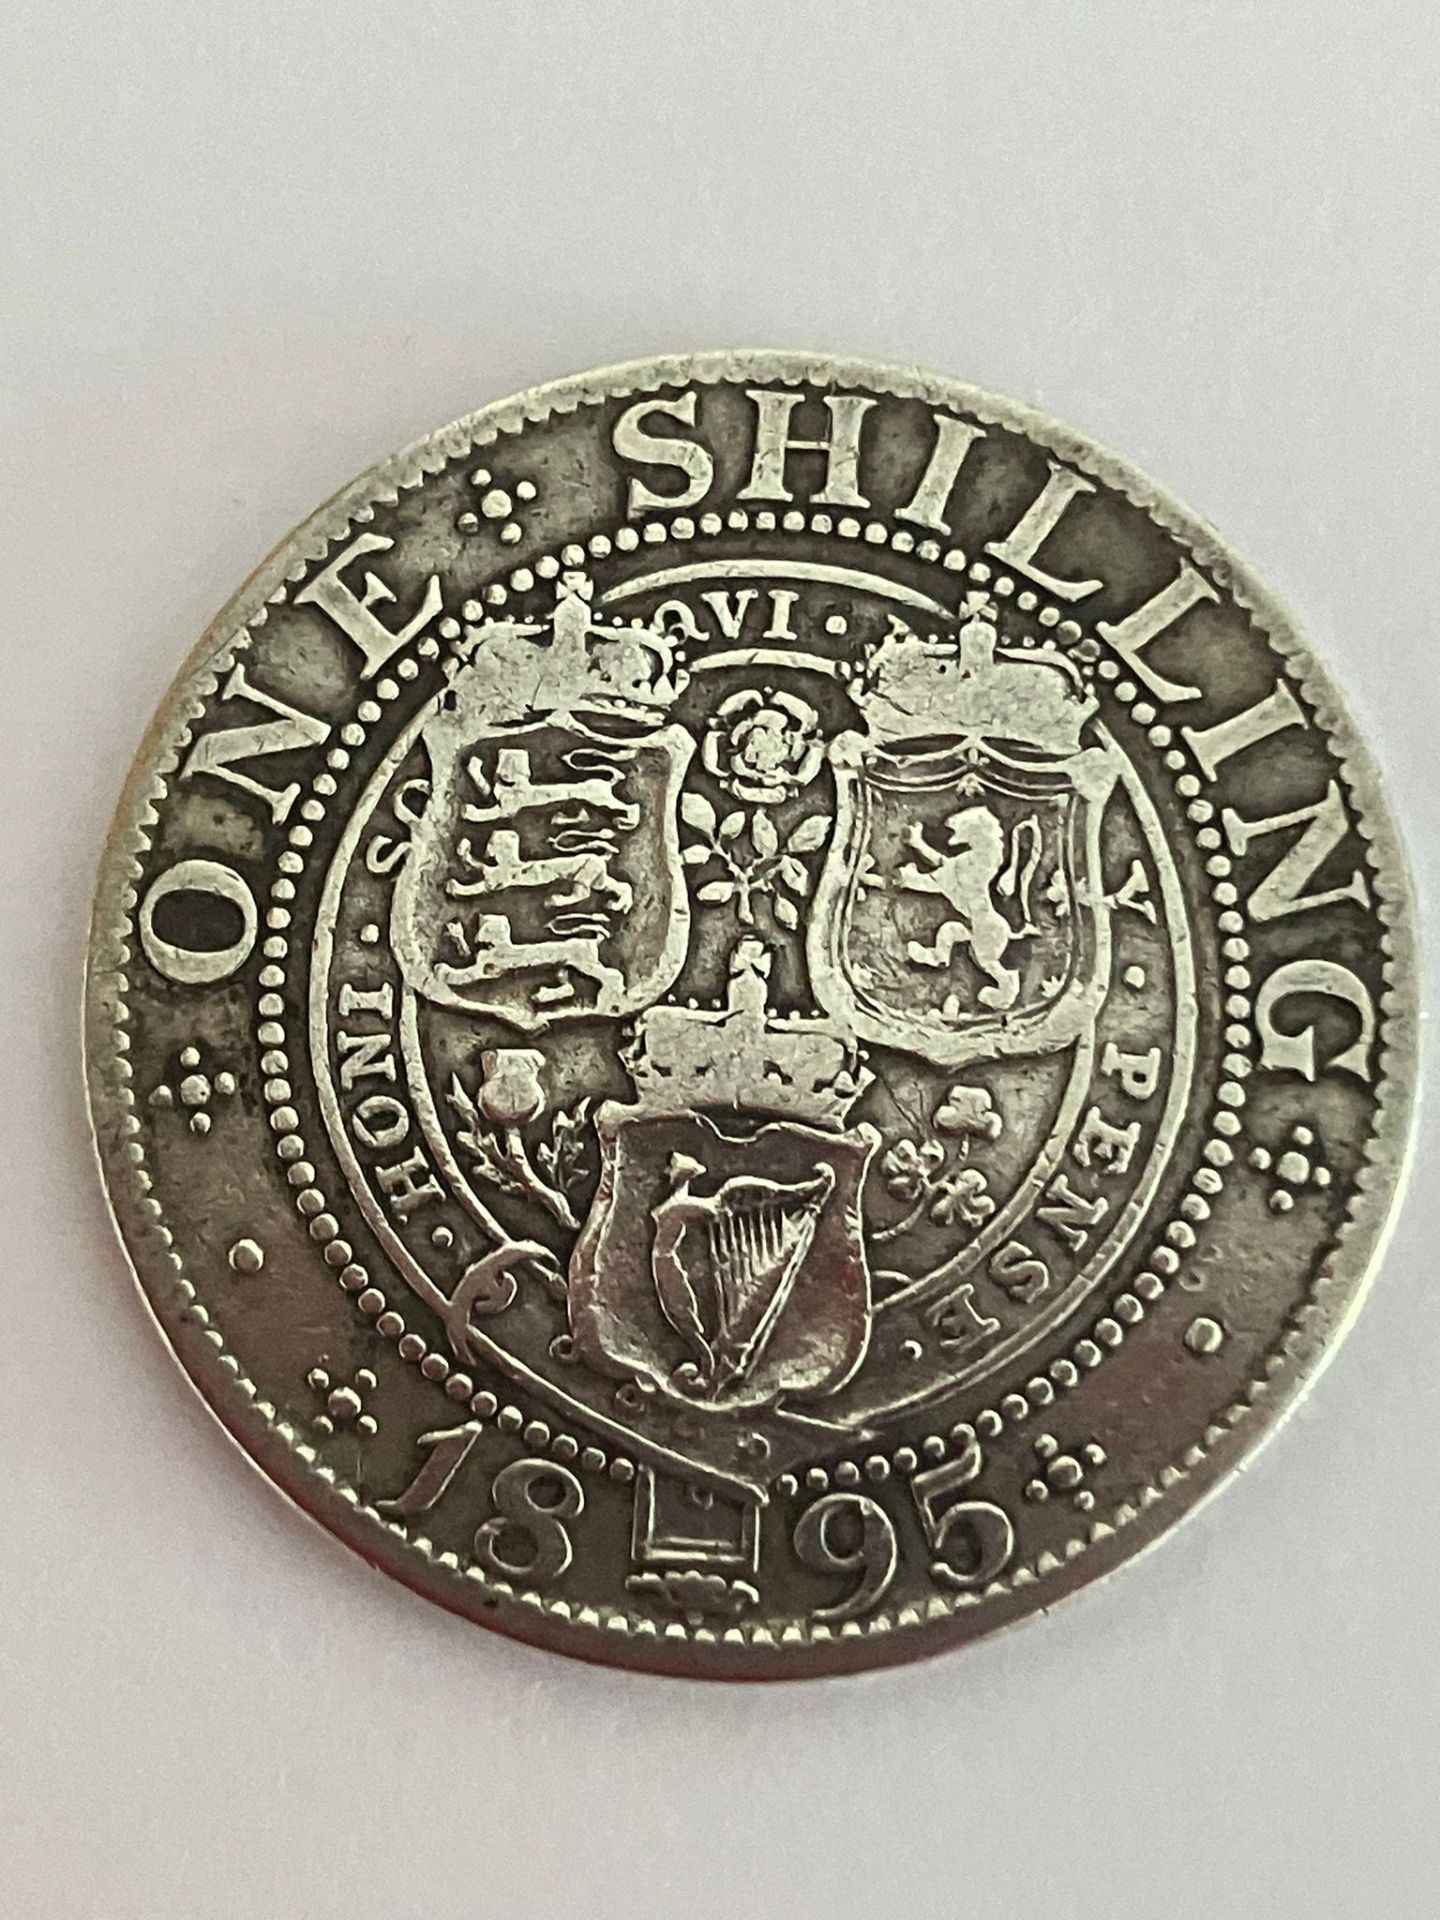 Victorian SILVER SHILLING 1895 in very fine condition. - Image 3 of 3